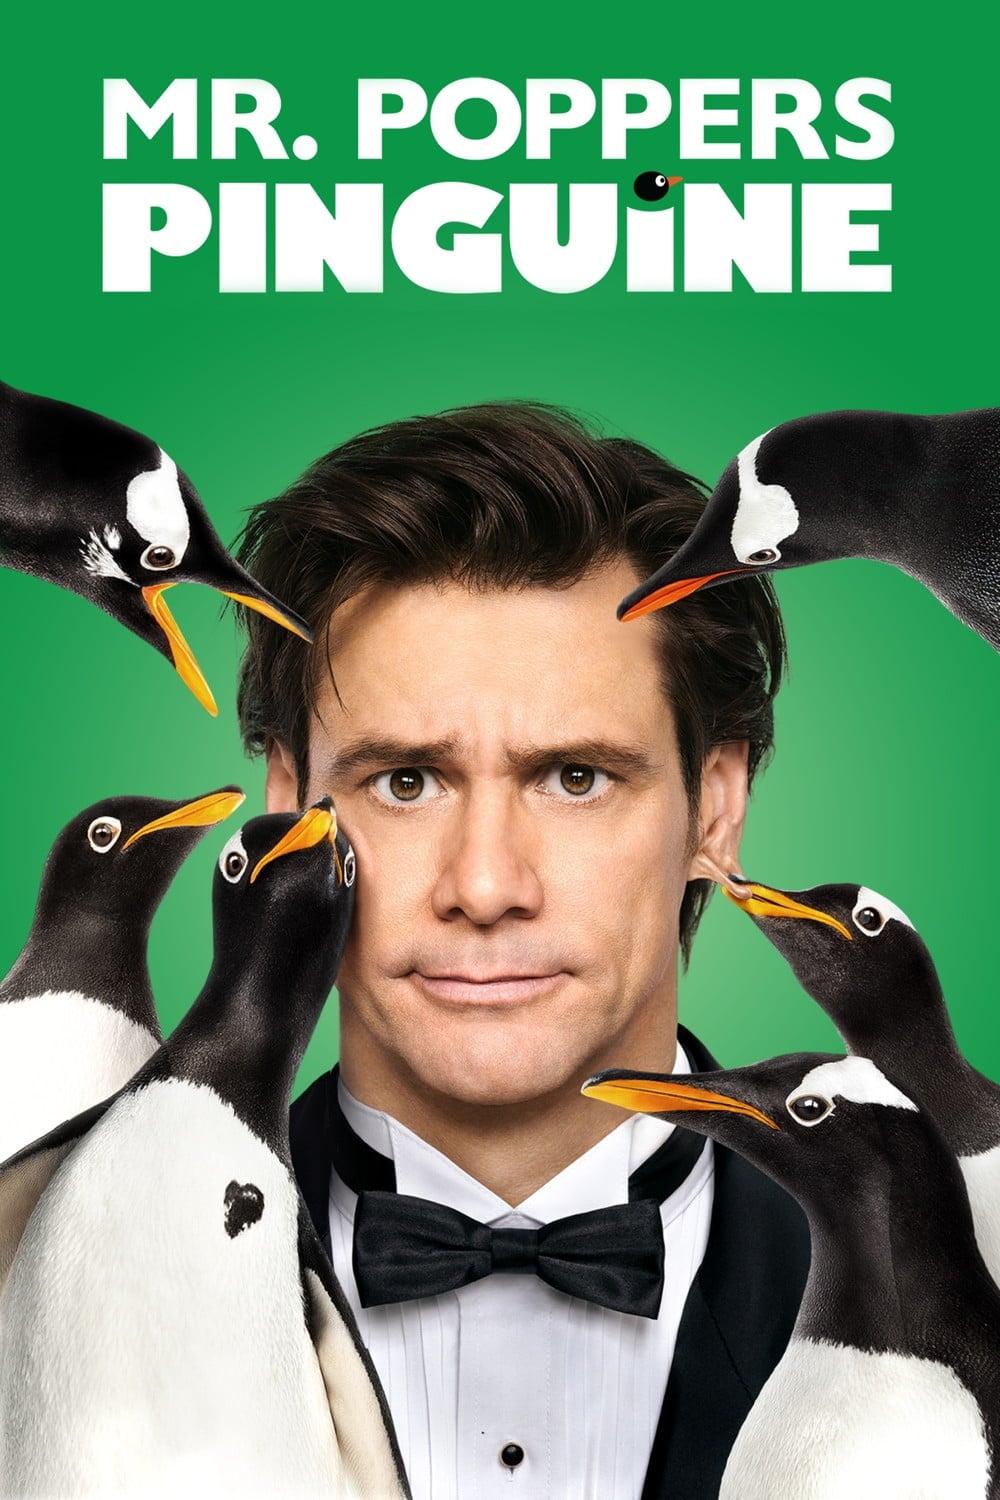 Mr. Poppers Pinguine poster